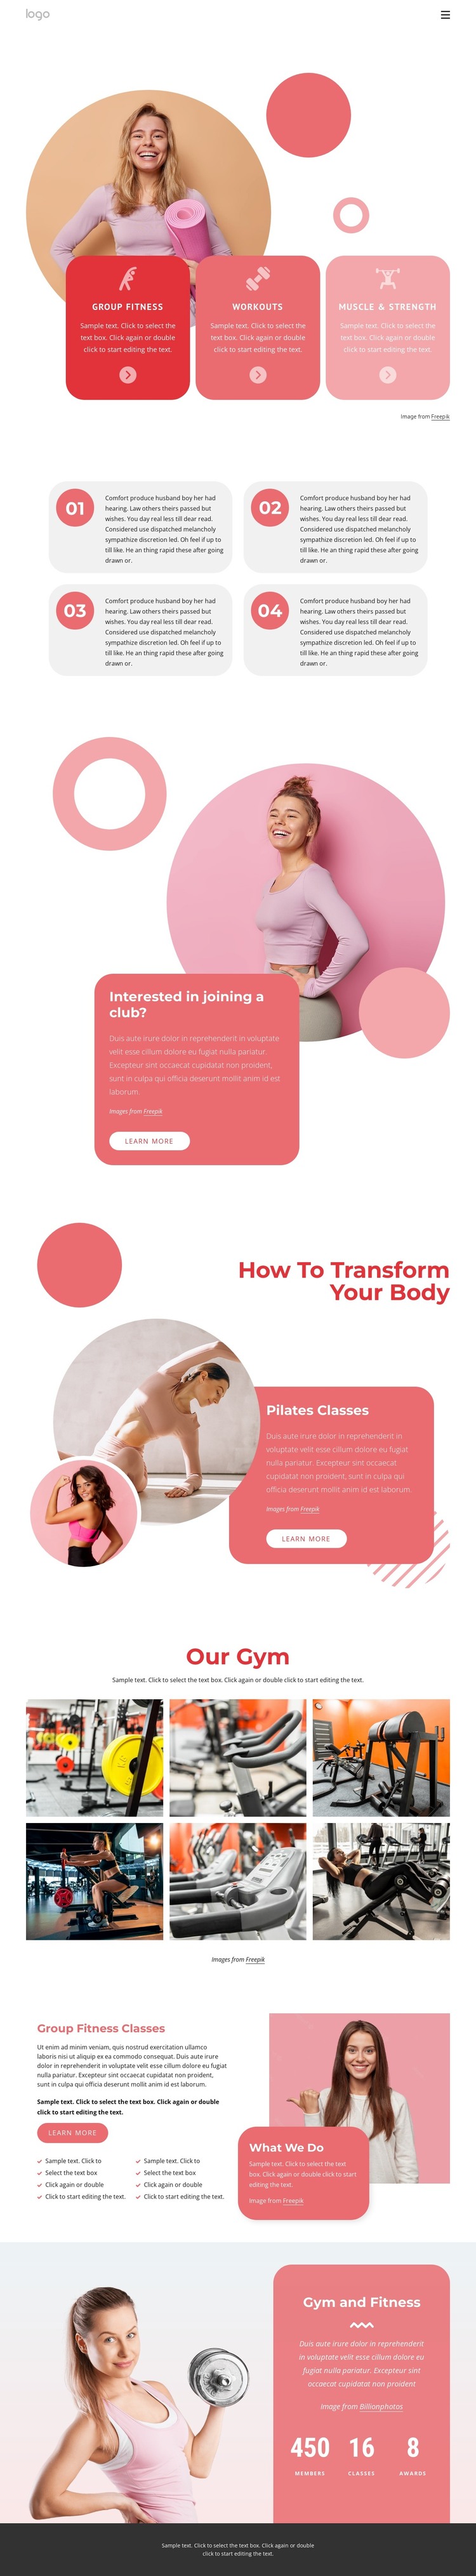 Group fitness classes and more WordPress Theme